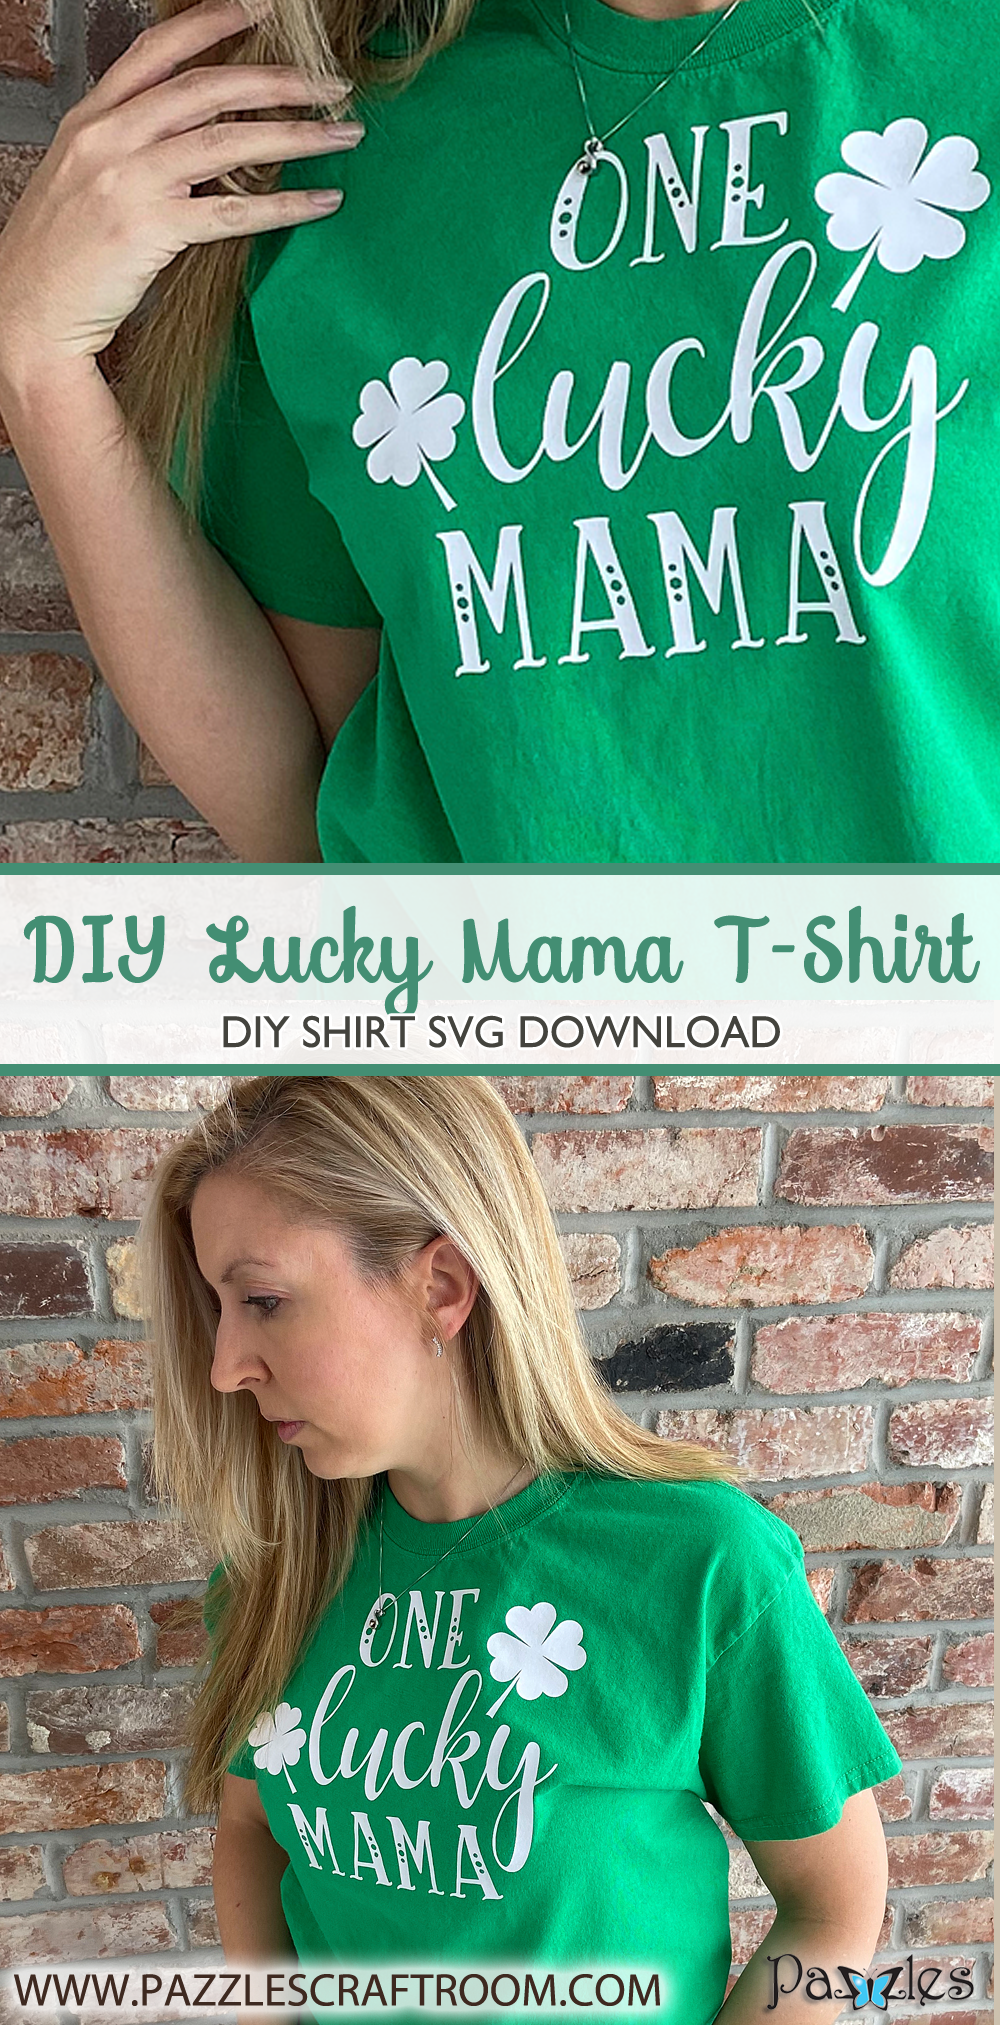 Pazzles DIY One Lucky Mama DIY T-shirt with instant SVG download. Compatible with all major electronic cutters including Pazzles Inspiration, Cricut, and Silhouette Cameo. Design by Sara Weber.